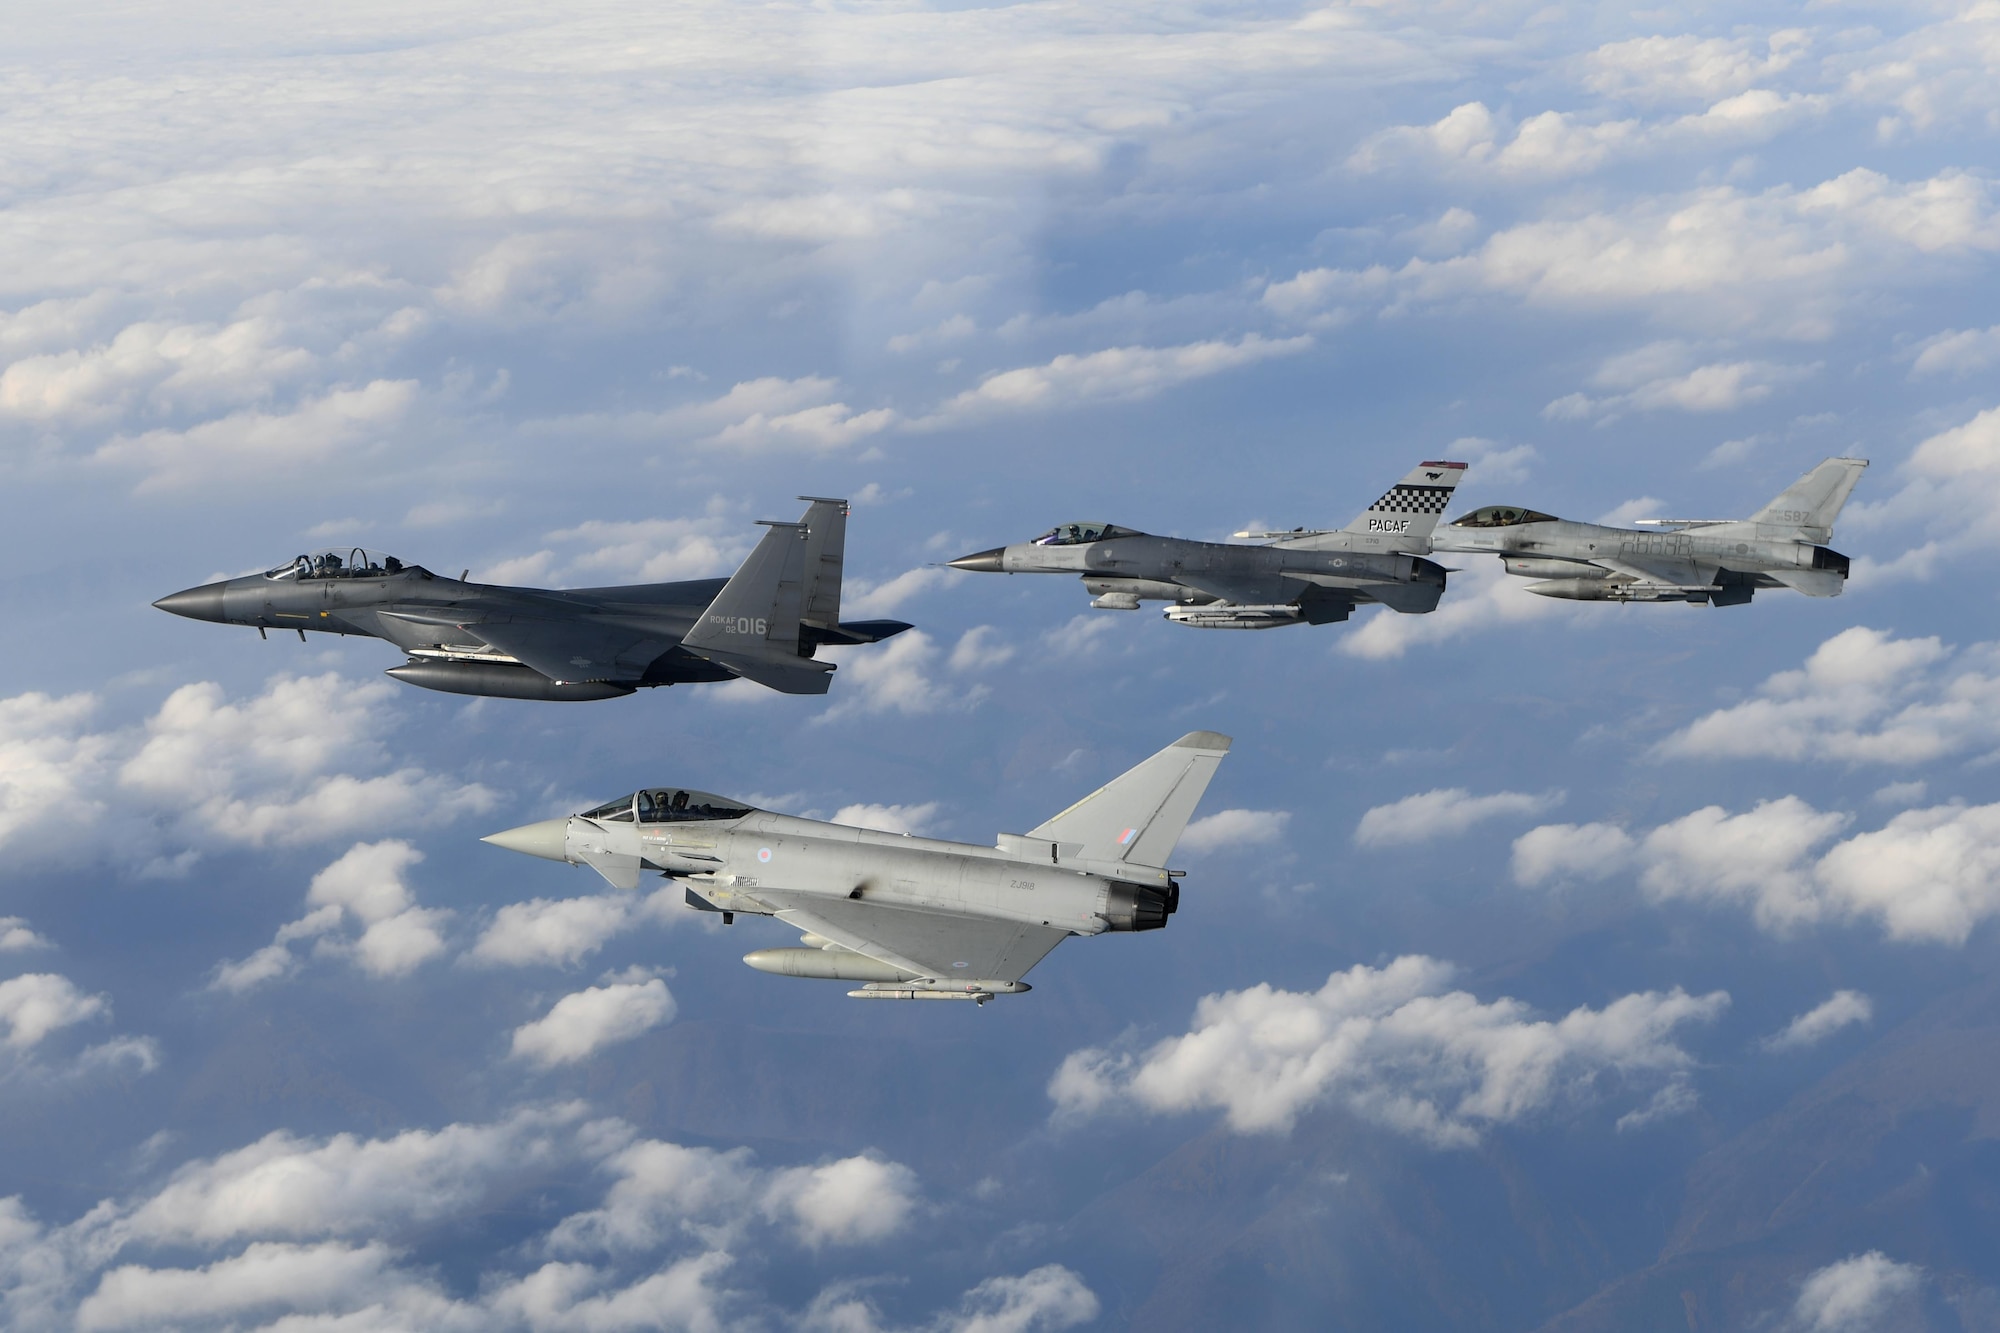 A Royal Air Force Eurofighter Typhoon FRG4, U.S. Air Force F-16 Fighting Falcon, and a Republic of Korea air force F-16 and F-15K Slam Eagle fly in formation during Invincible Shield on Osan Air Base, Republic of Korea, Nov. 7, 2016. The intent of Invincible Shield is to bolster the interoperability between the RoK, the U.S. and United Kingdom while improving combat capability in the Pacific region. (DoD photo by Chief Master Sgt. Kim, Kyeong Ryul, Republic of Korea air force)